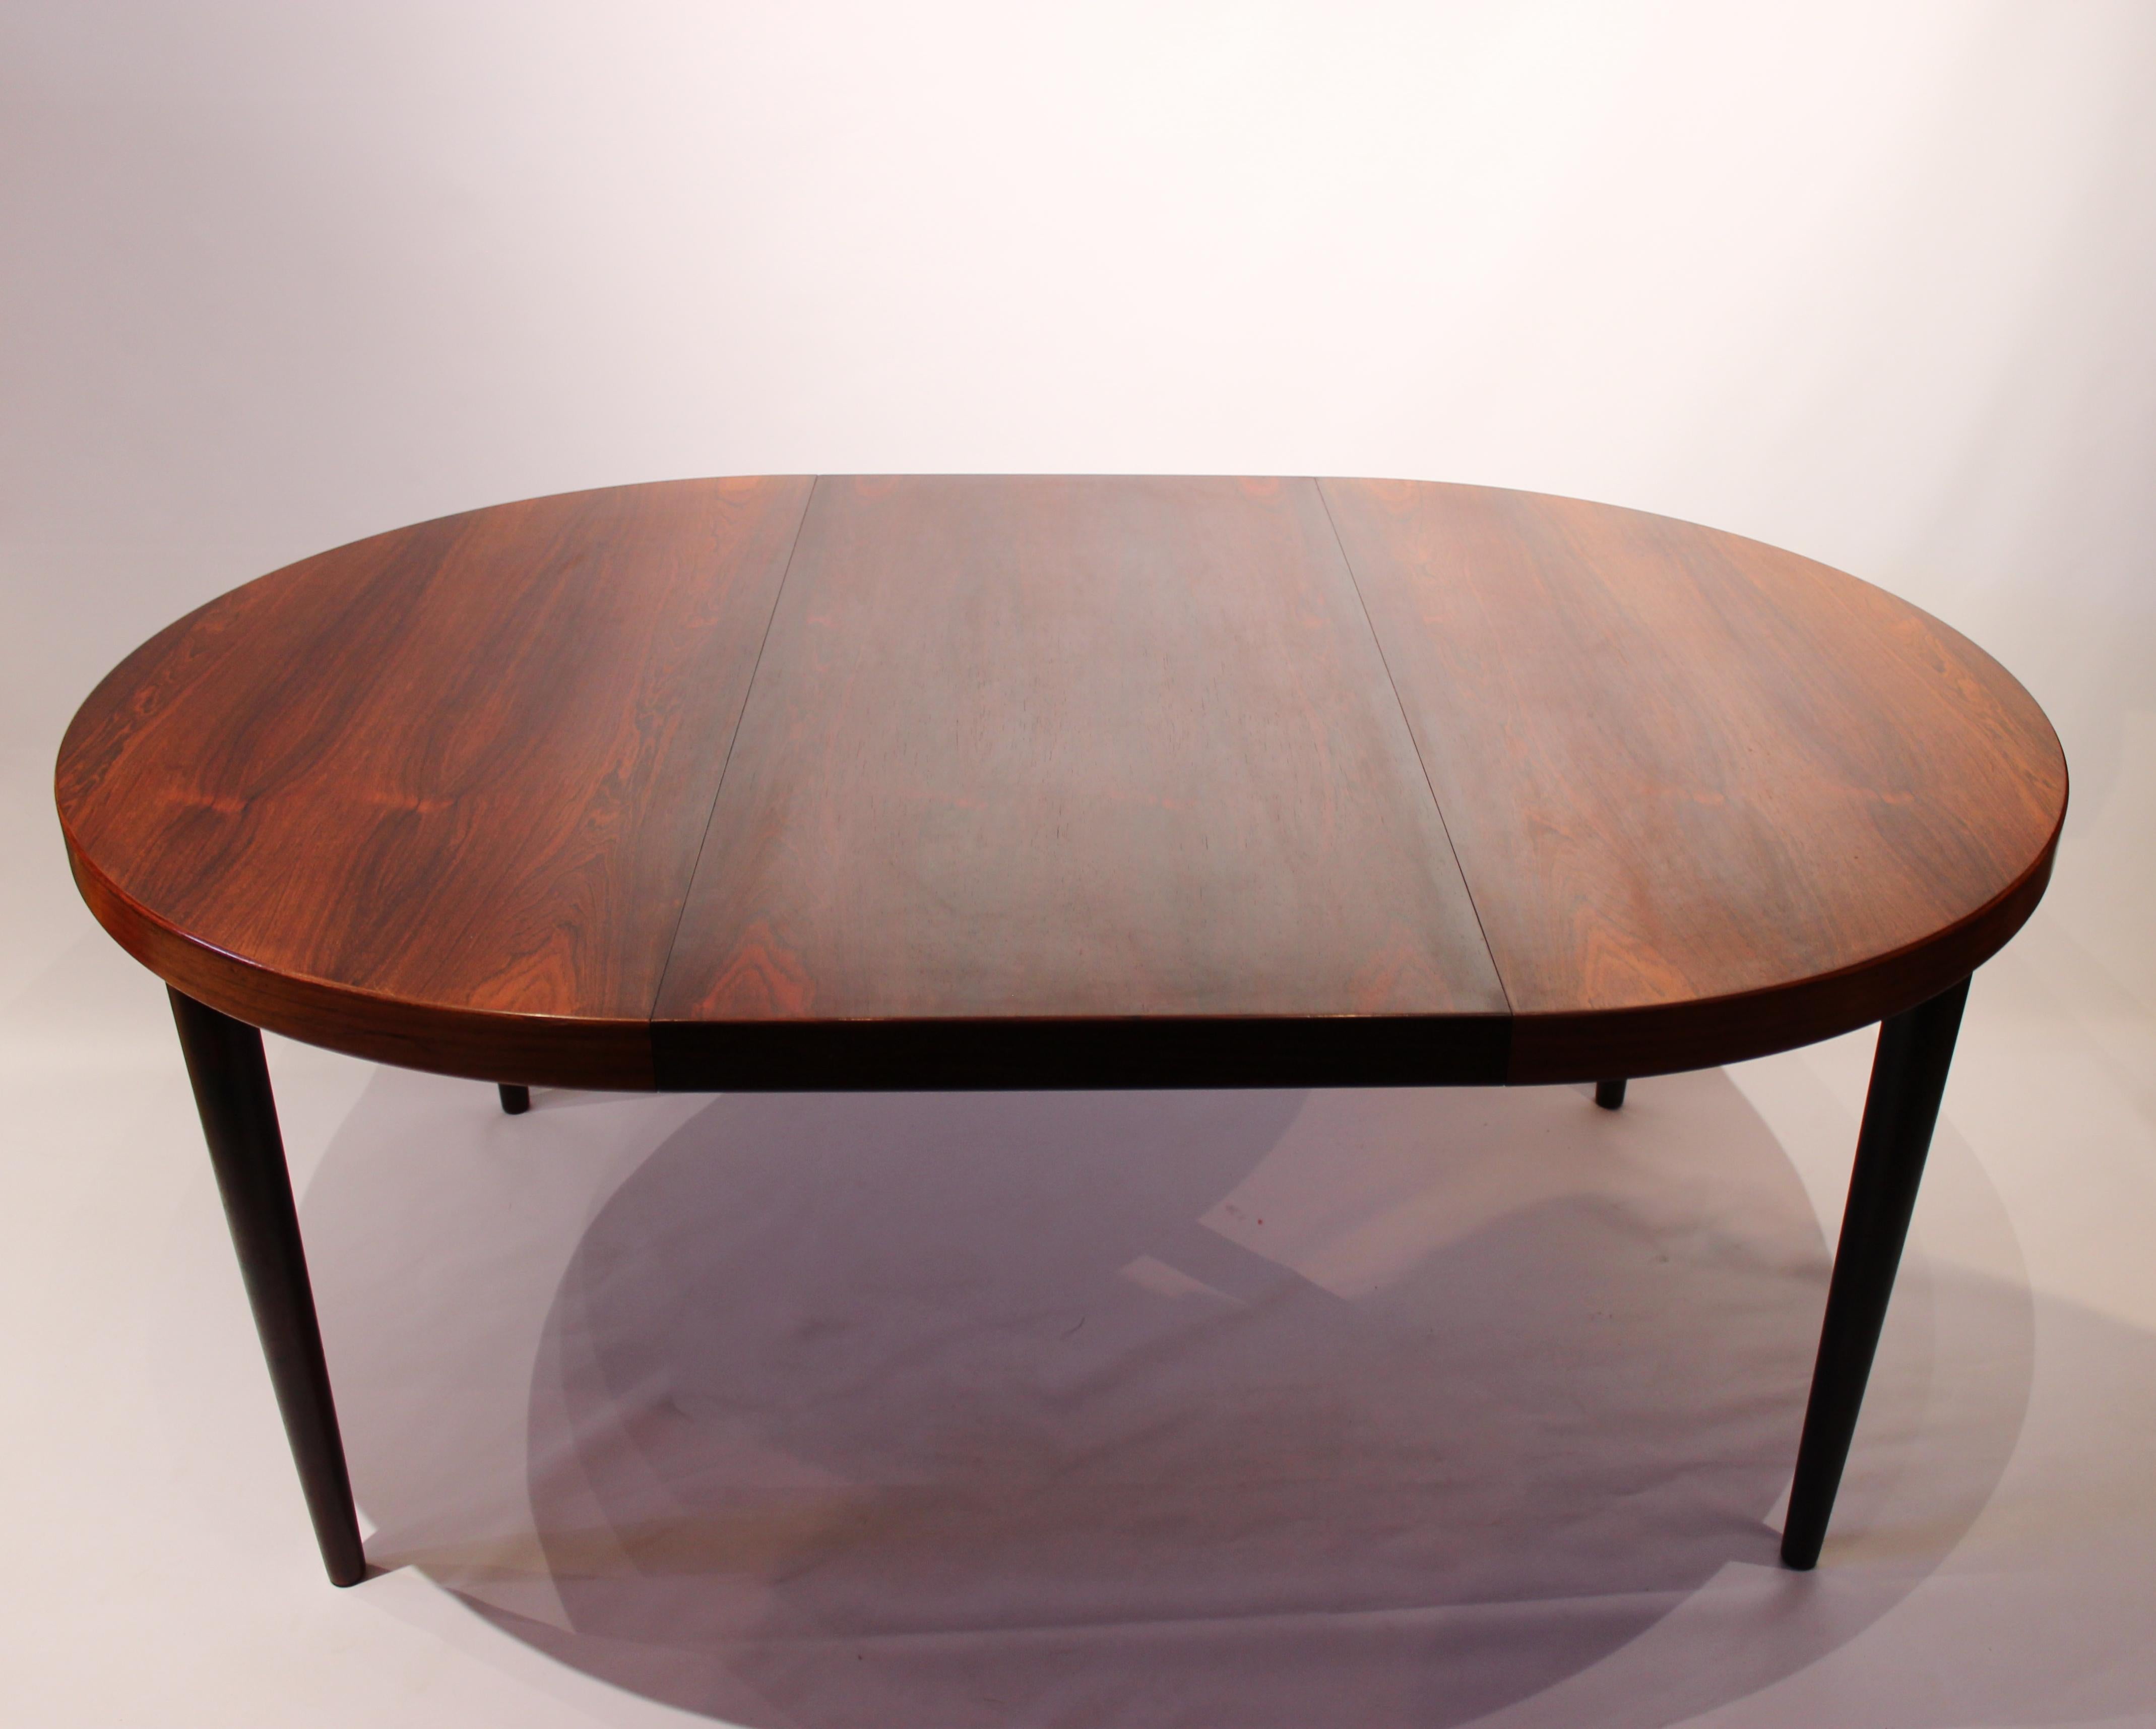 
This dining table exemplifies the exquisite craftsmanship and elegant design characteristic of Danish furniture from the 1960s. Crafted from rosewood, it exudes a rich, luxurious aesthetic that adds sophistication to any dining space.

Omann